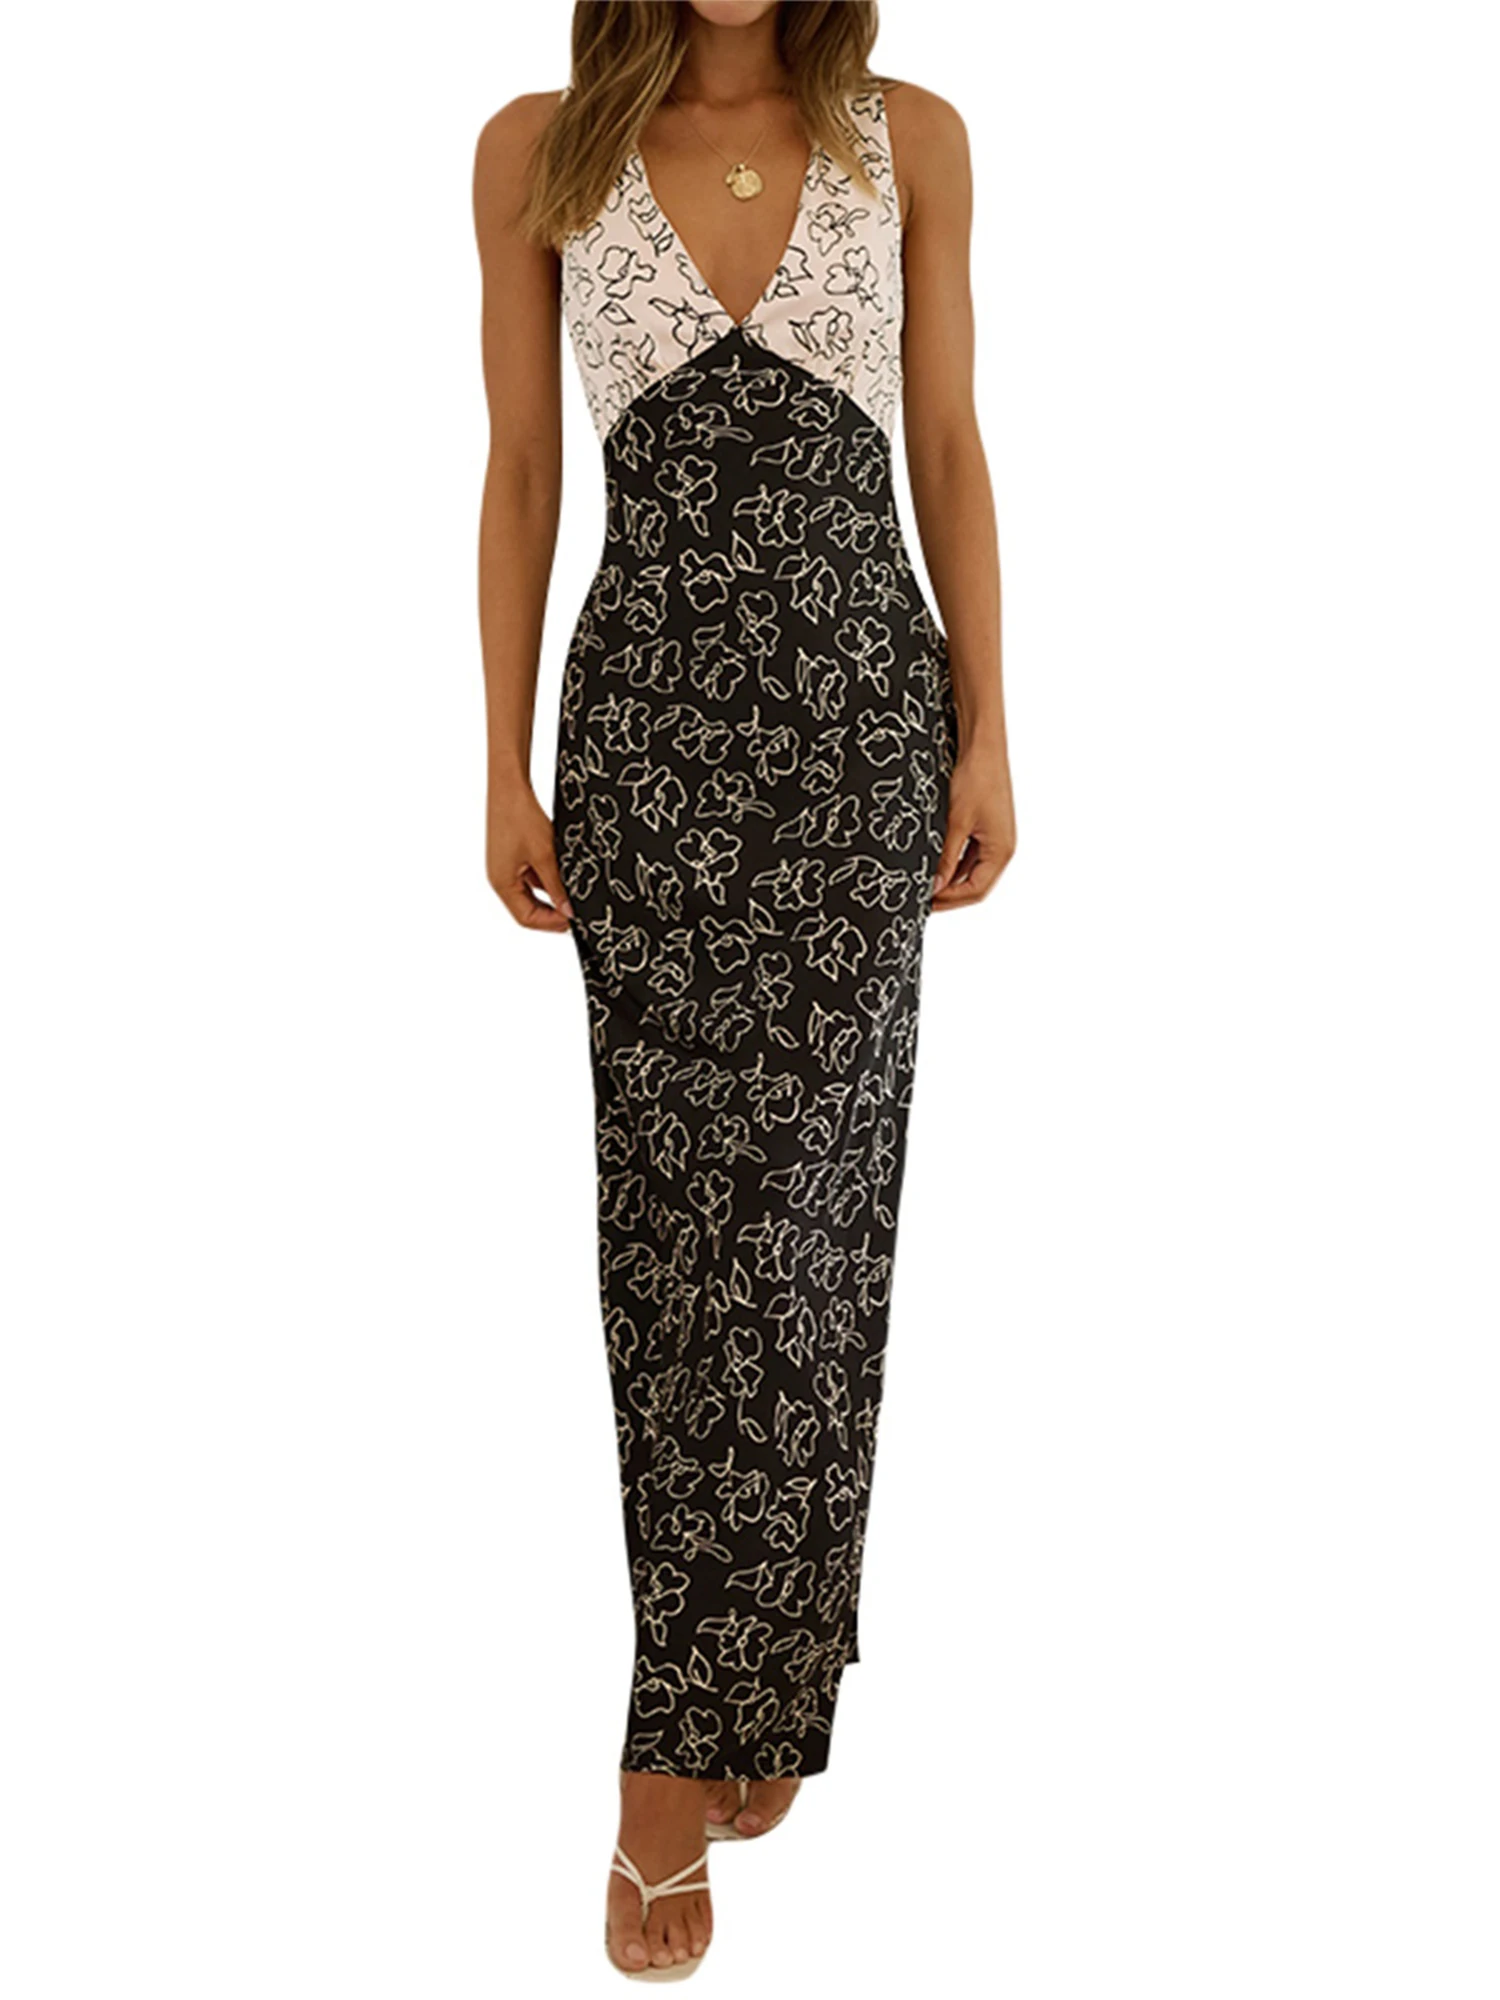 

Bohemian Style V-Neck Backless Maxi Dress with Floral Print Spaghetti Straps - Perfect for Summer Parties Clubbing and